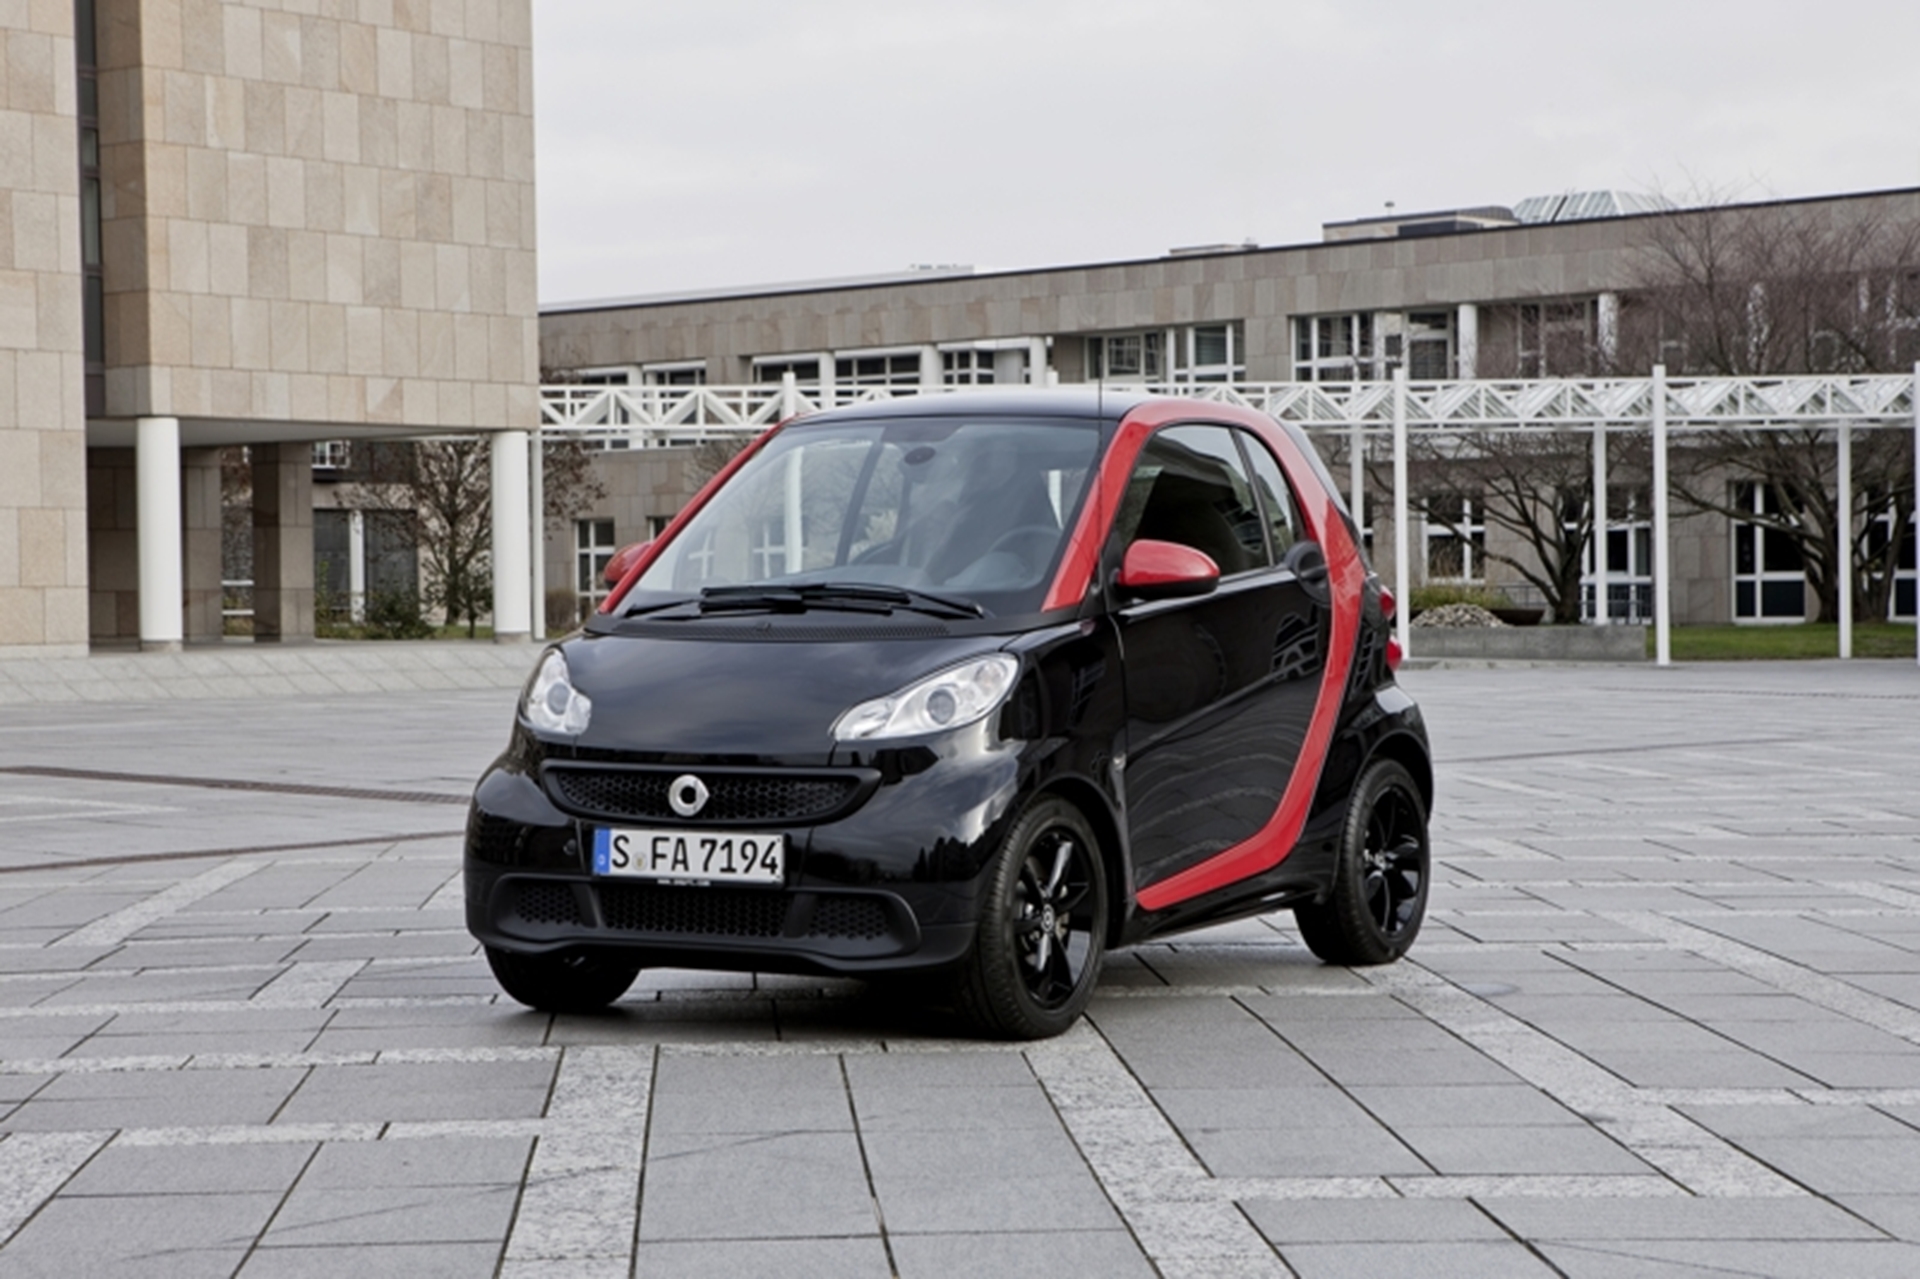 Smart fortwo At dealers from May 2012